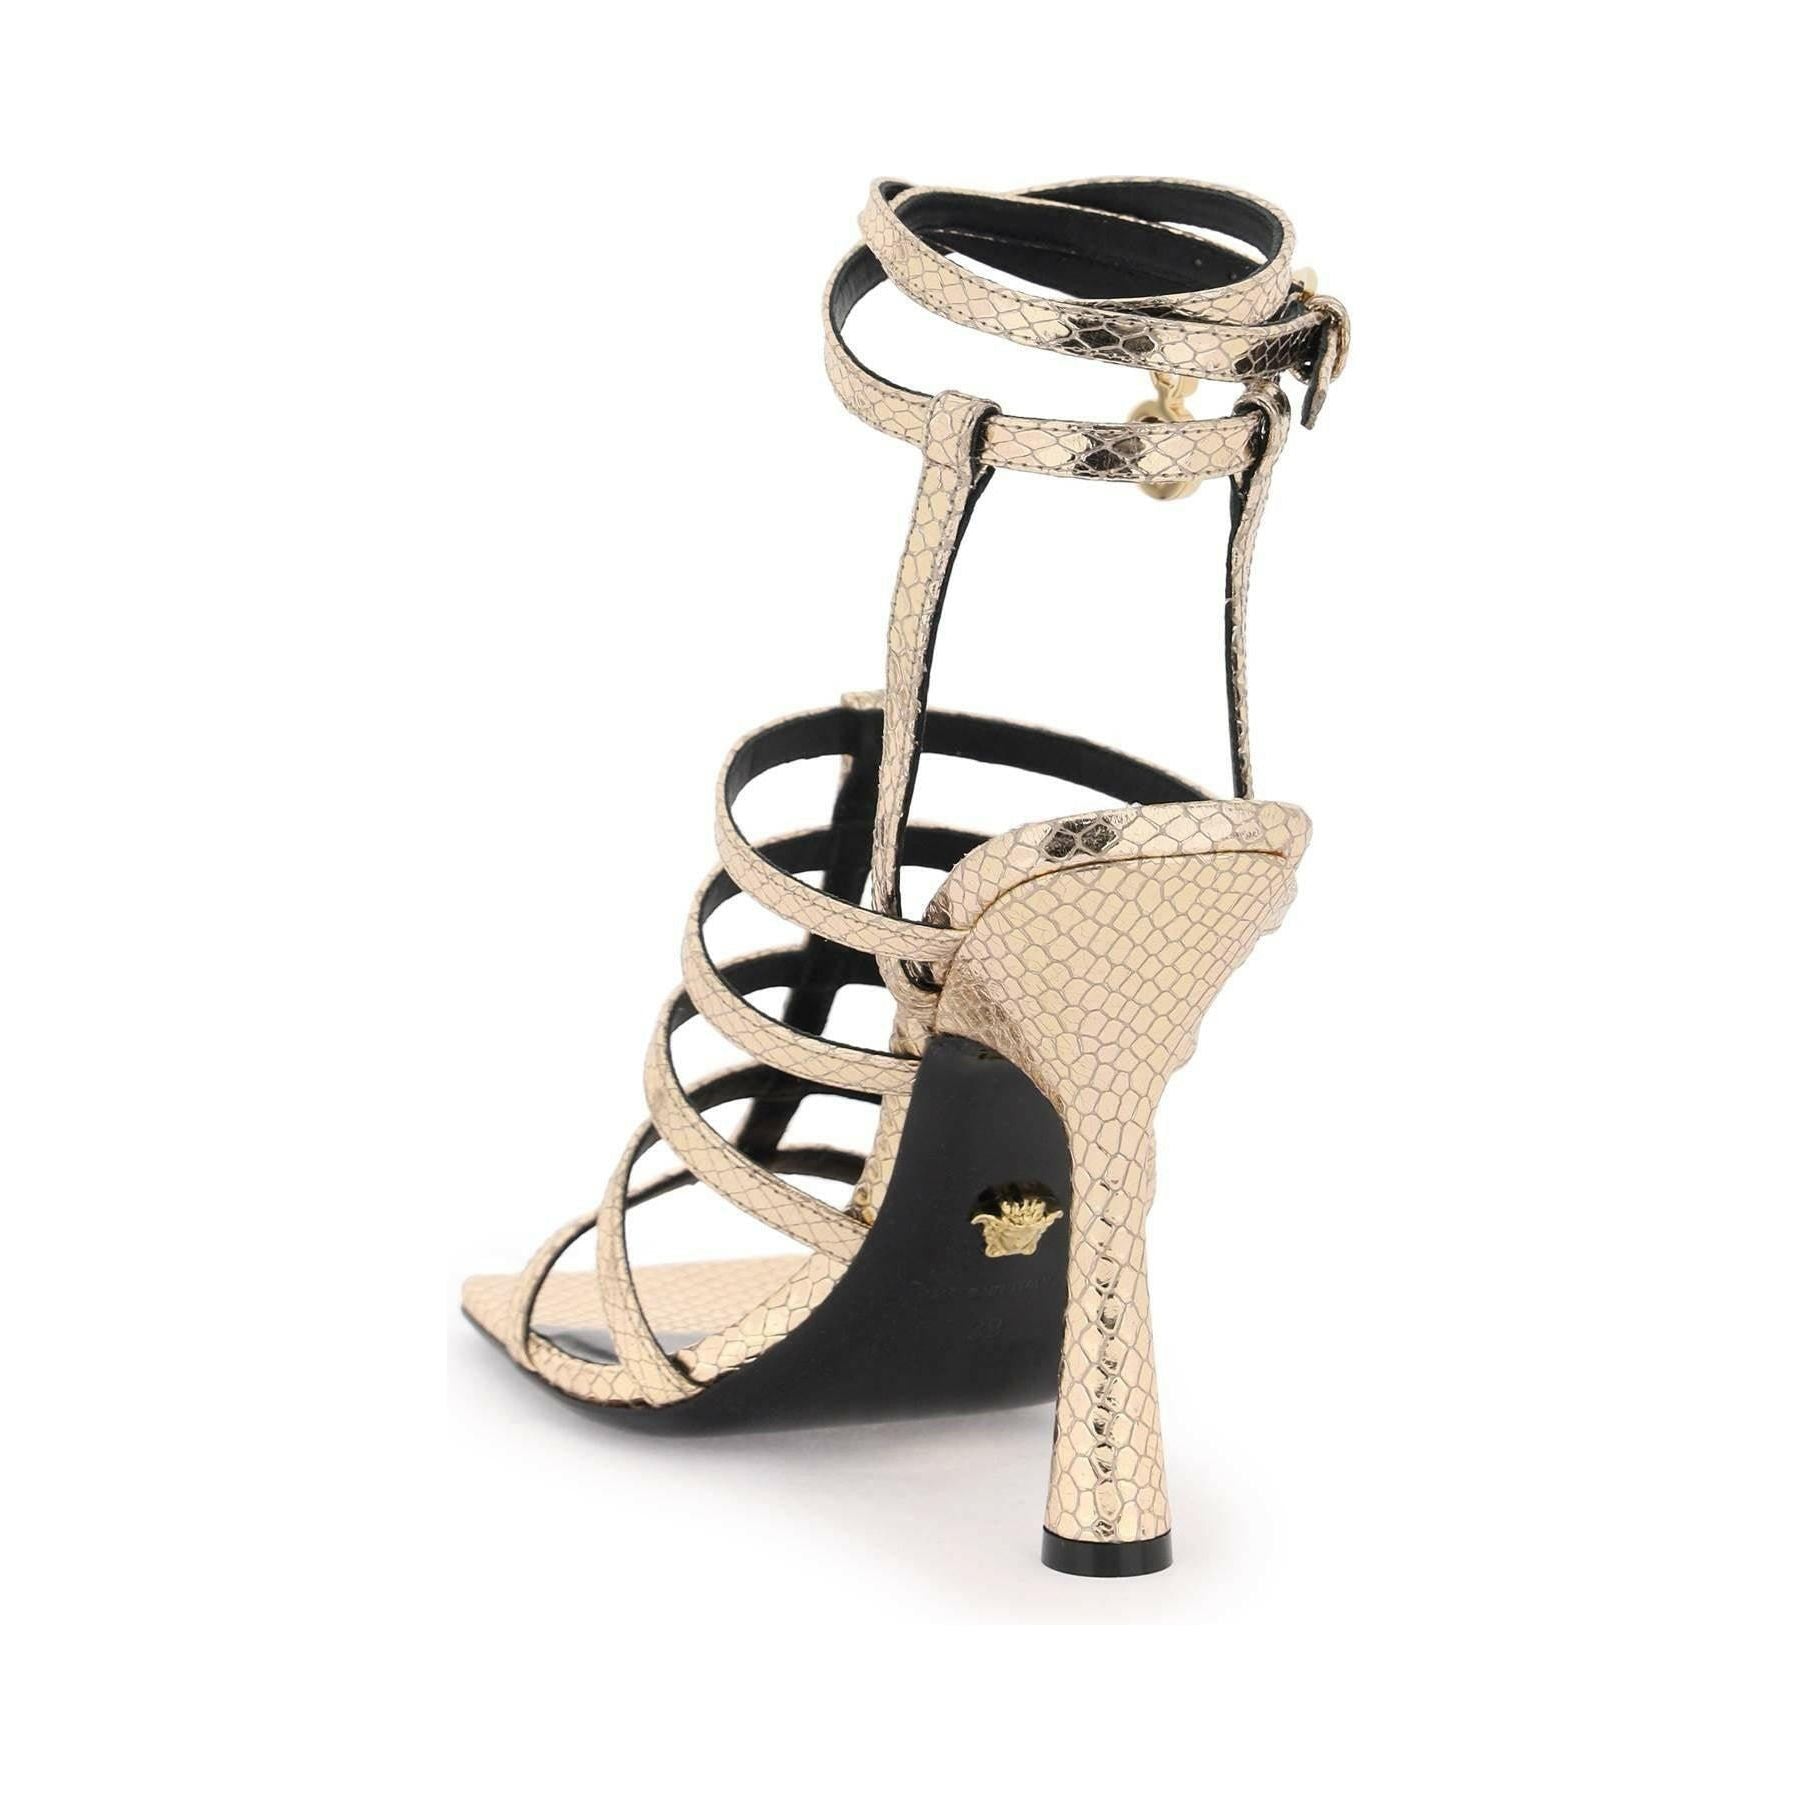 Champagne Gold Snake-Effect Lycia Structure Sandals With Medusa Charm VERSACE JOHN JULIA.